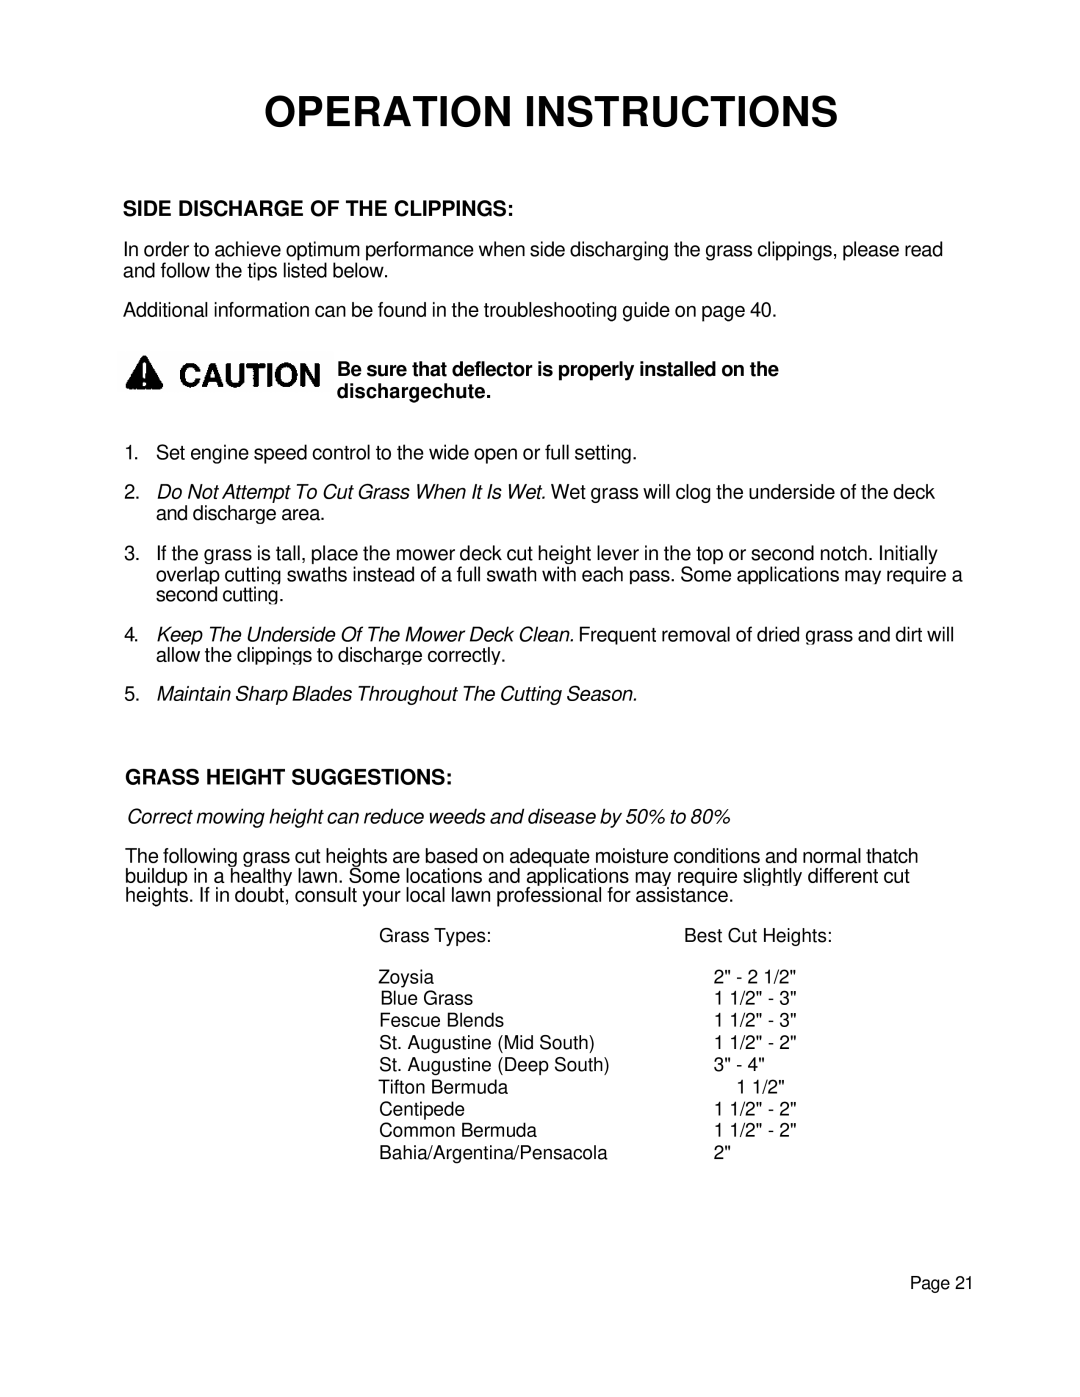 Dixon 5000 Series manual Operation Instructions, Side Discharge Of The Clippings, Grass Height Suggestions 